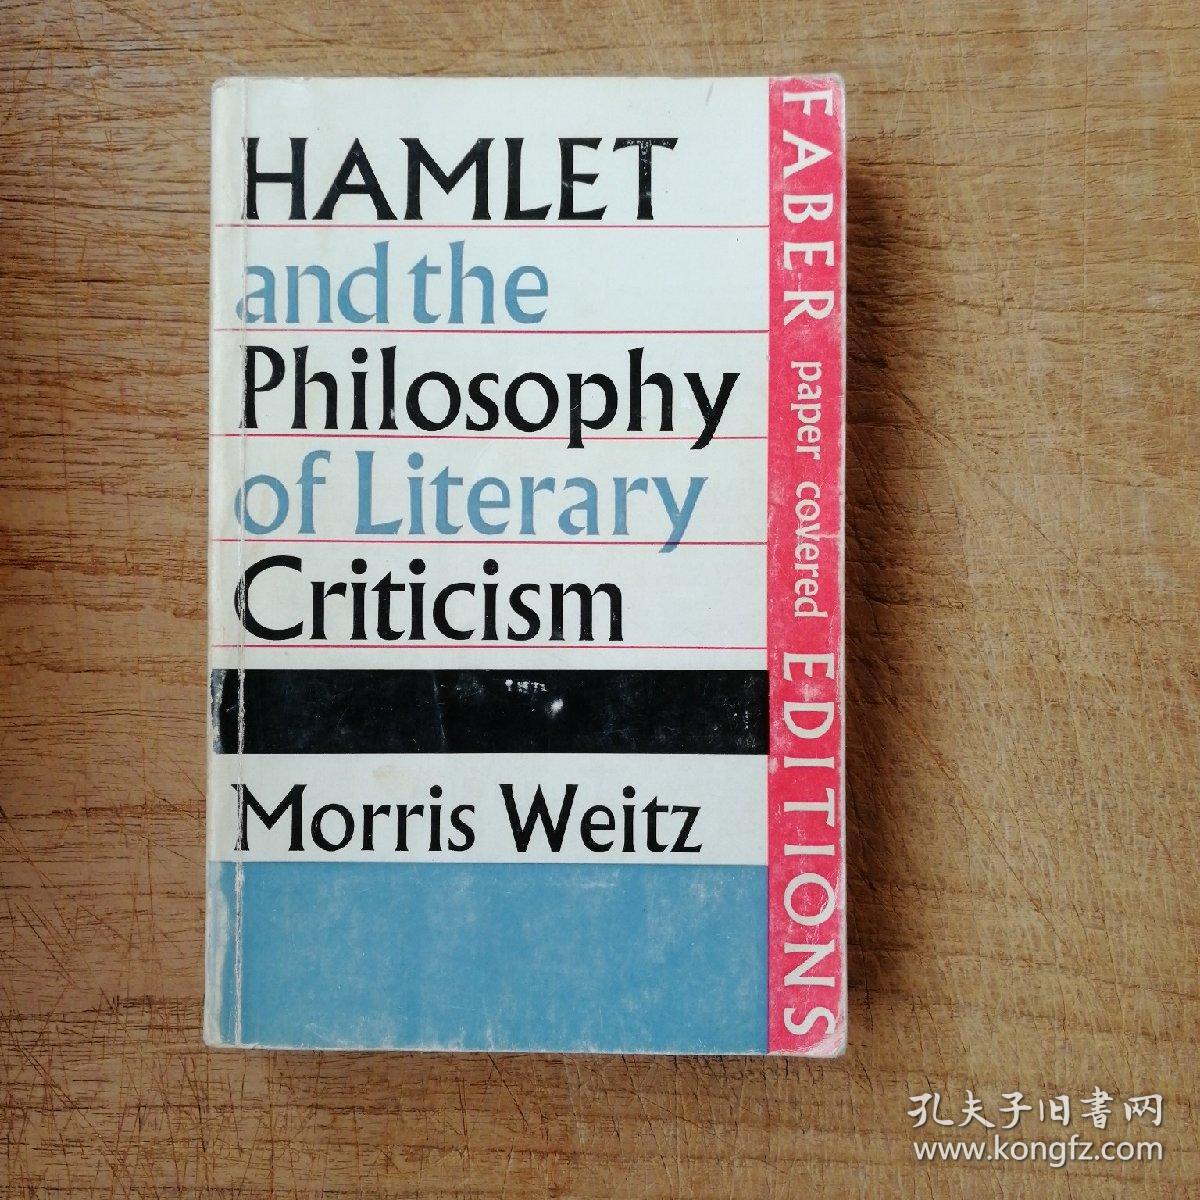 Hamlet and the philosophy of literary criticism